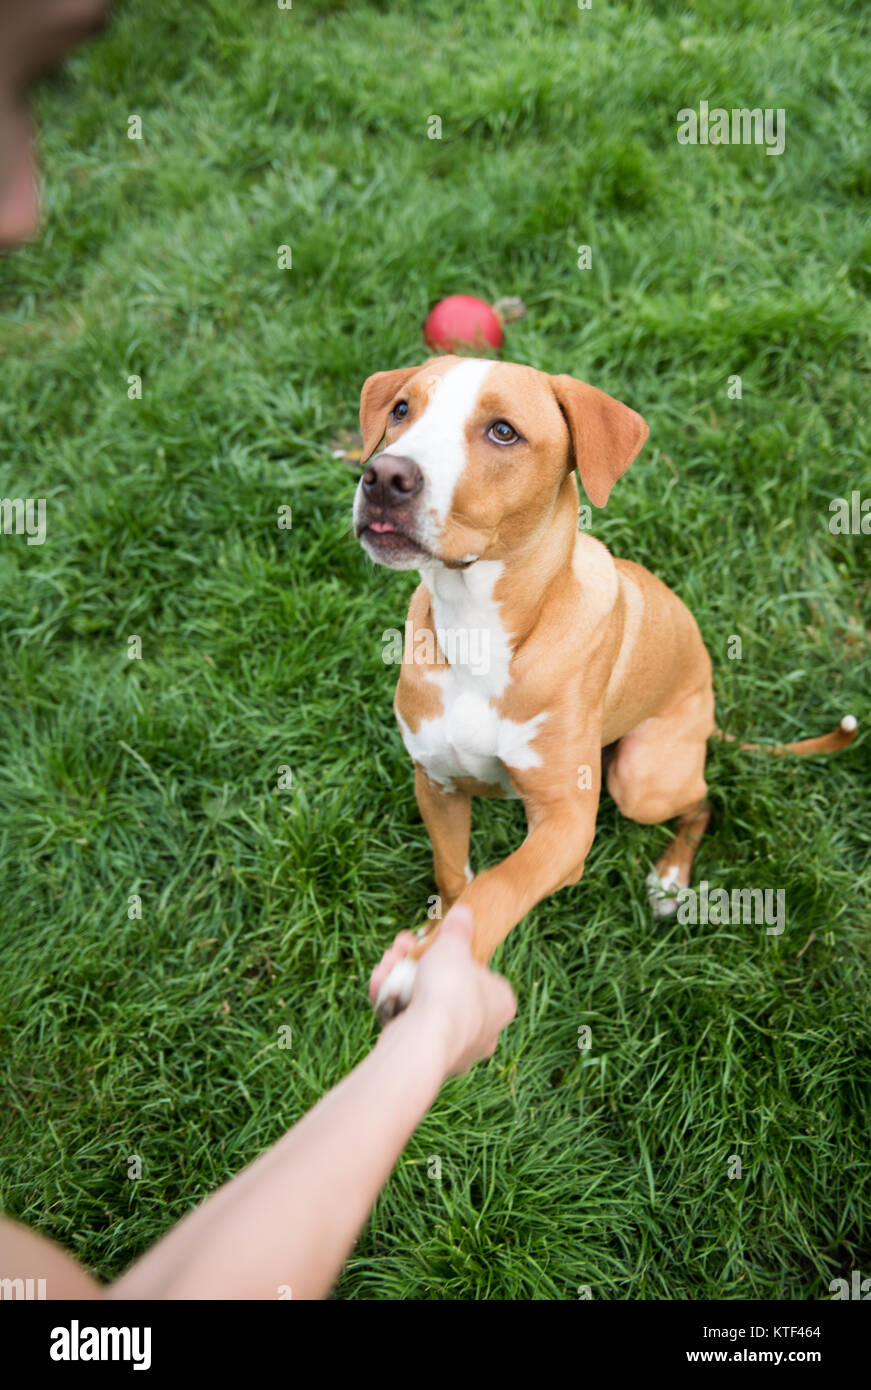 Cute Young Dog Being Trained Stock Photo